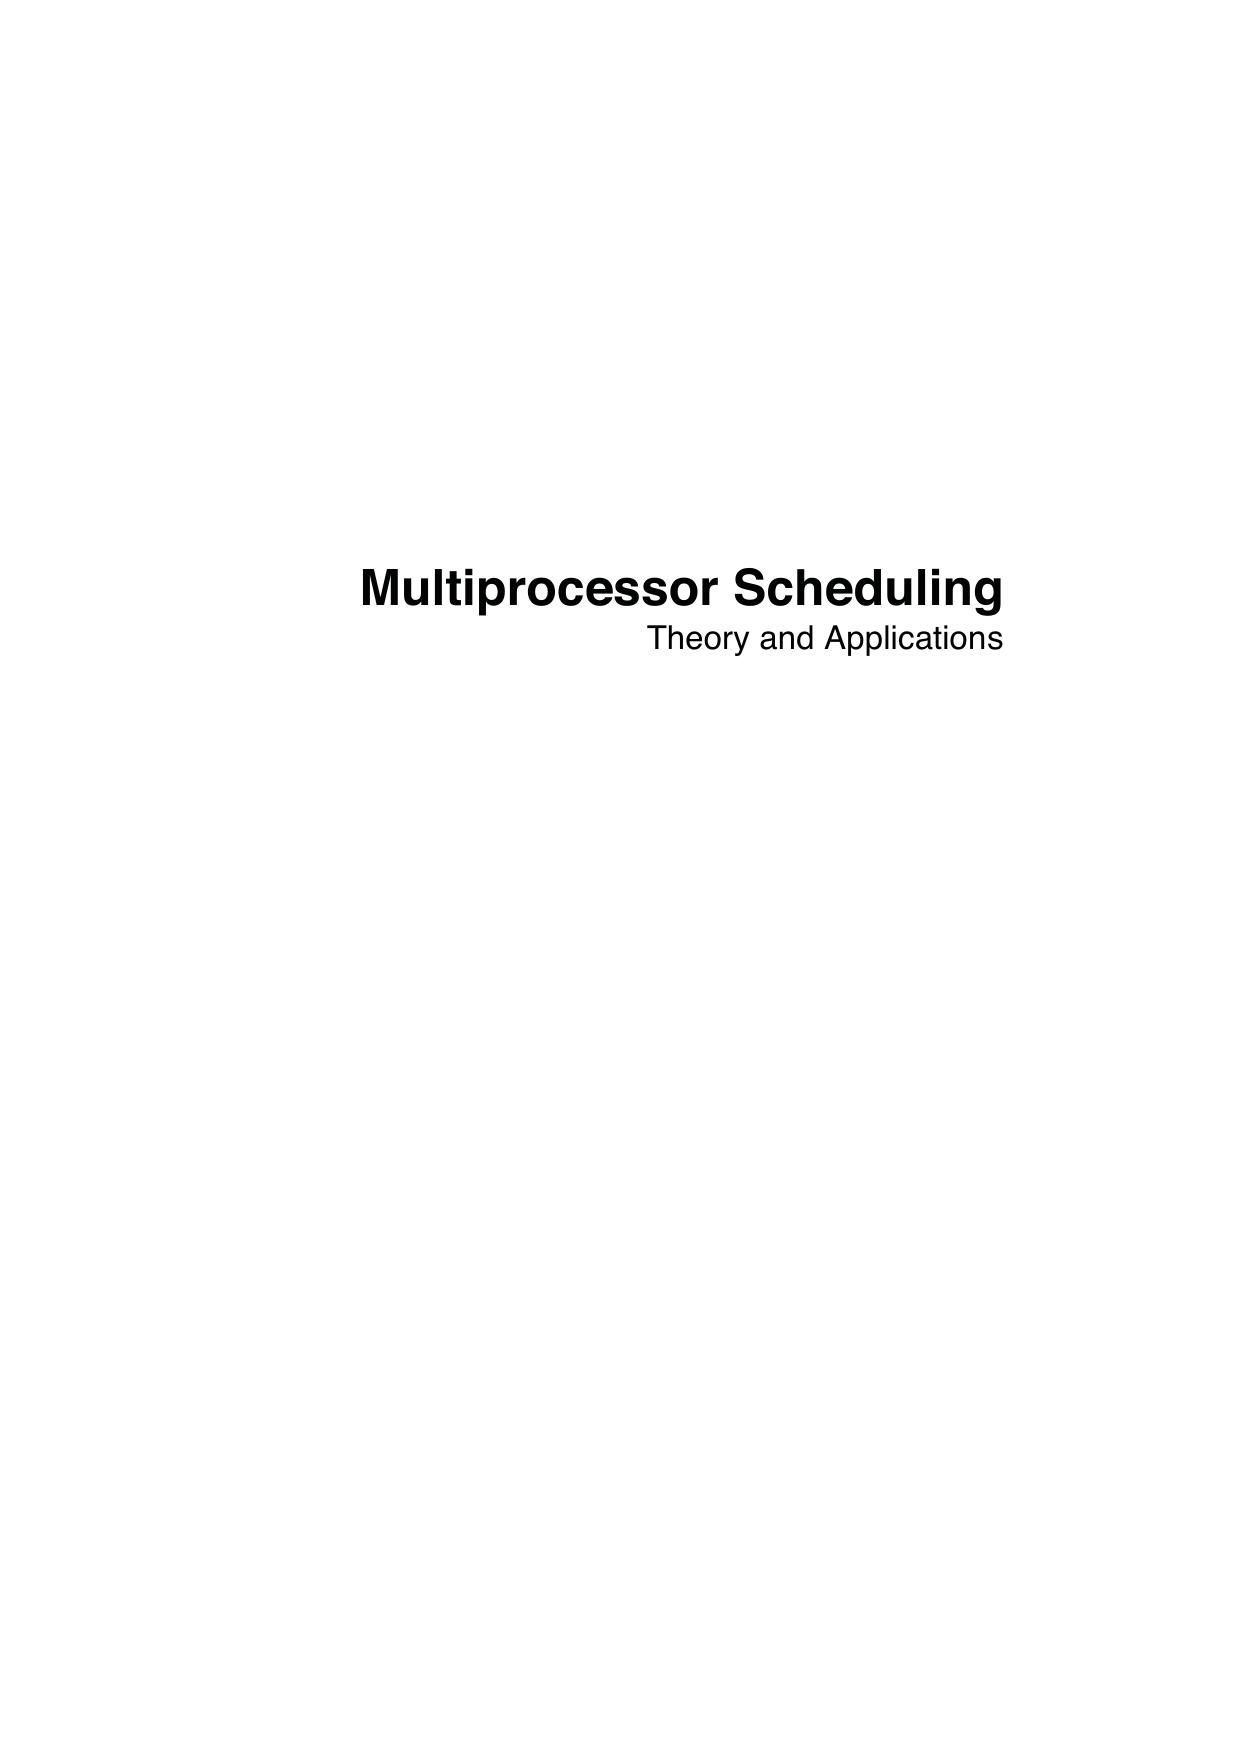 Multiprocessor Scheduling: Theory and Applications